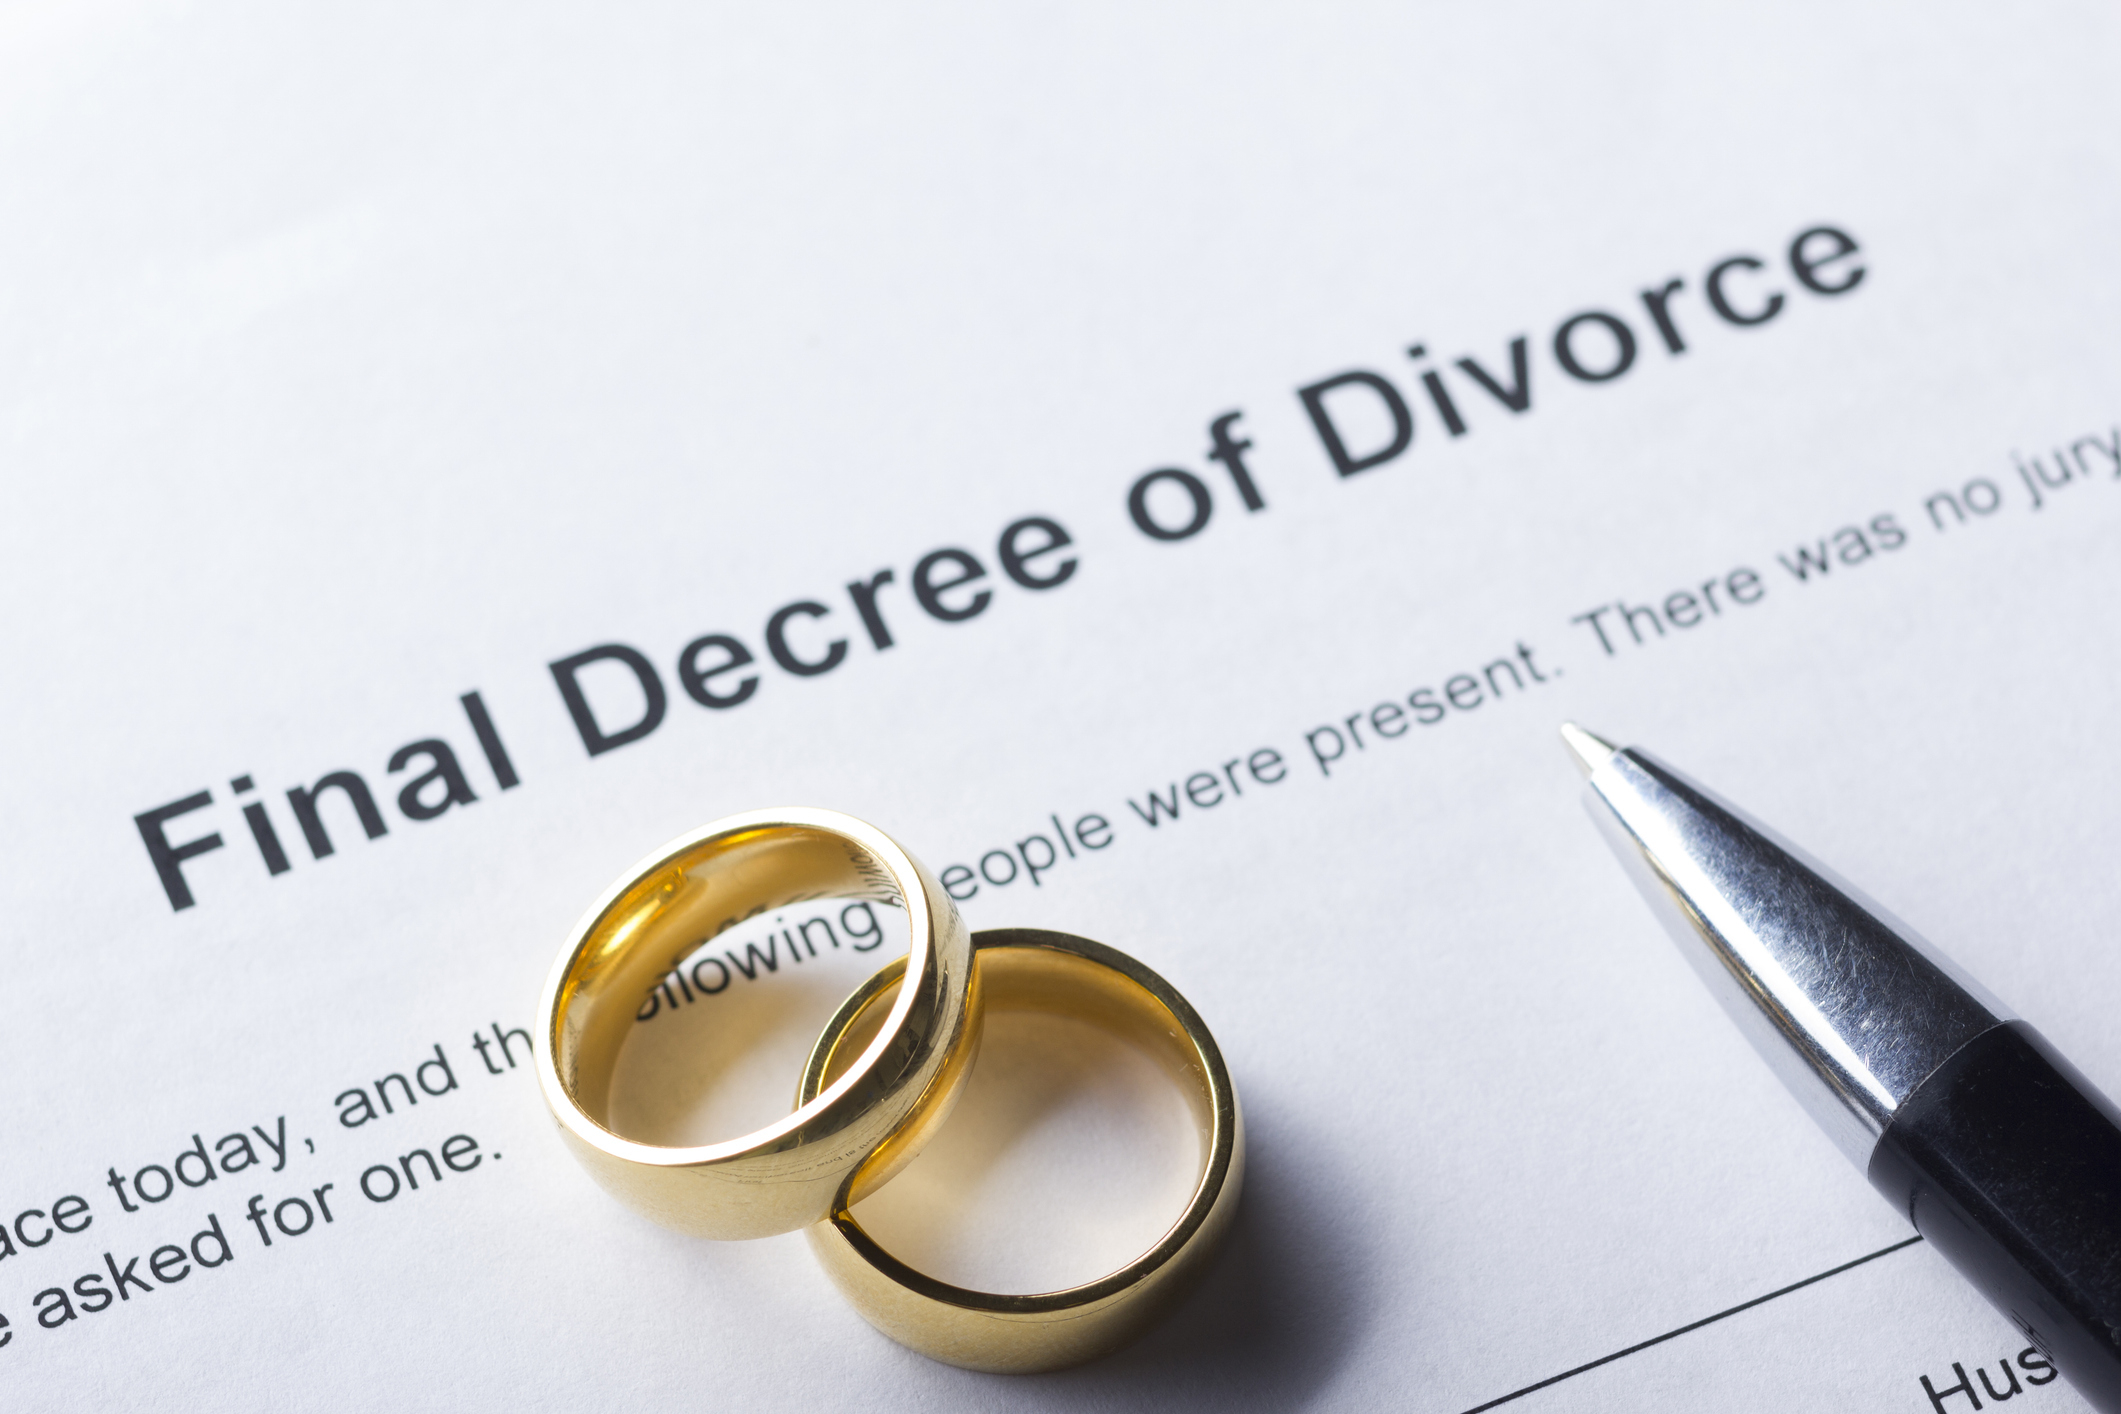 Document titled &quot;Final Decree of Divorce&quot; with two wedding rings and a pen, indicating the end of a marriage